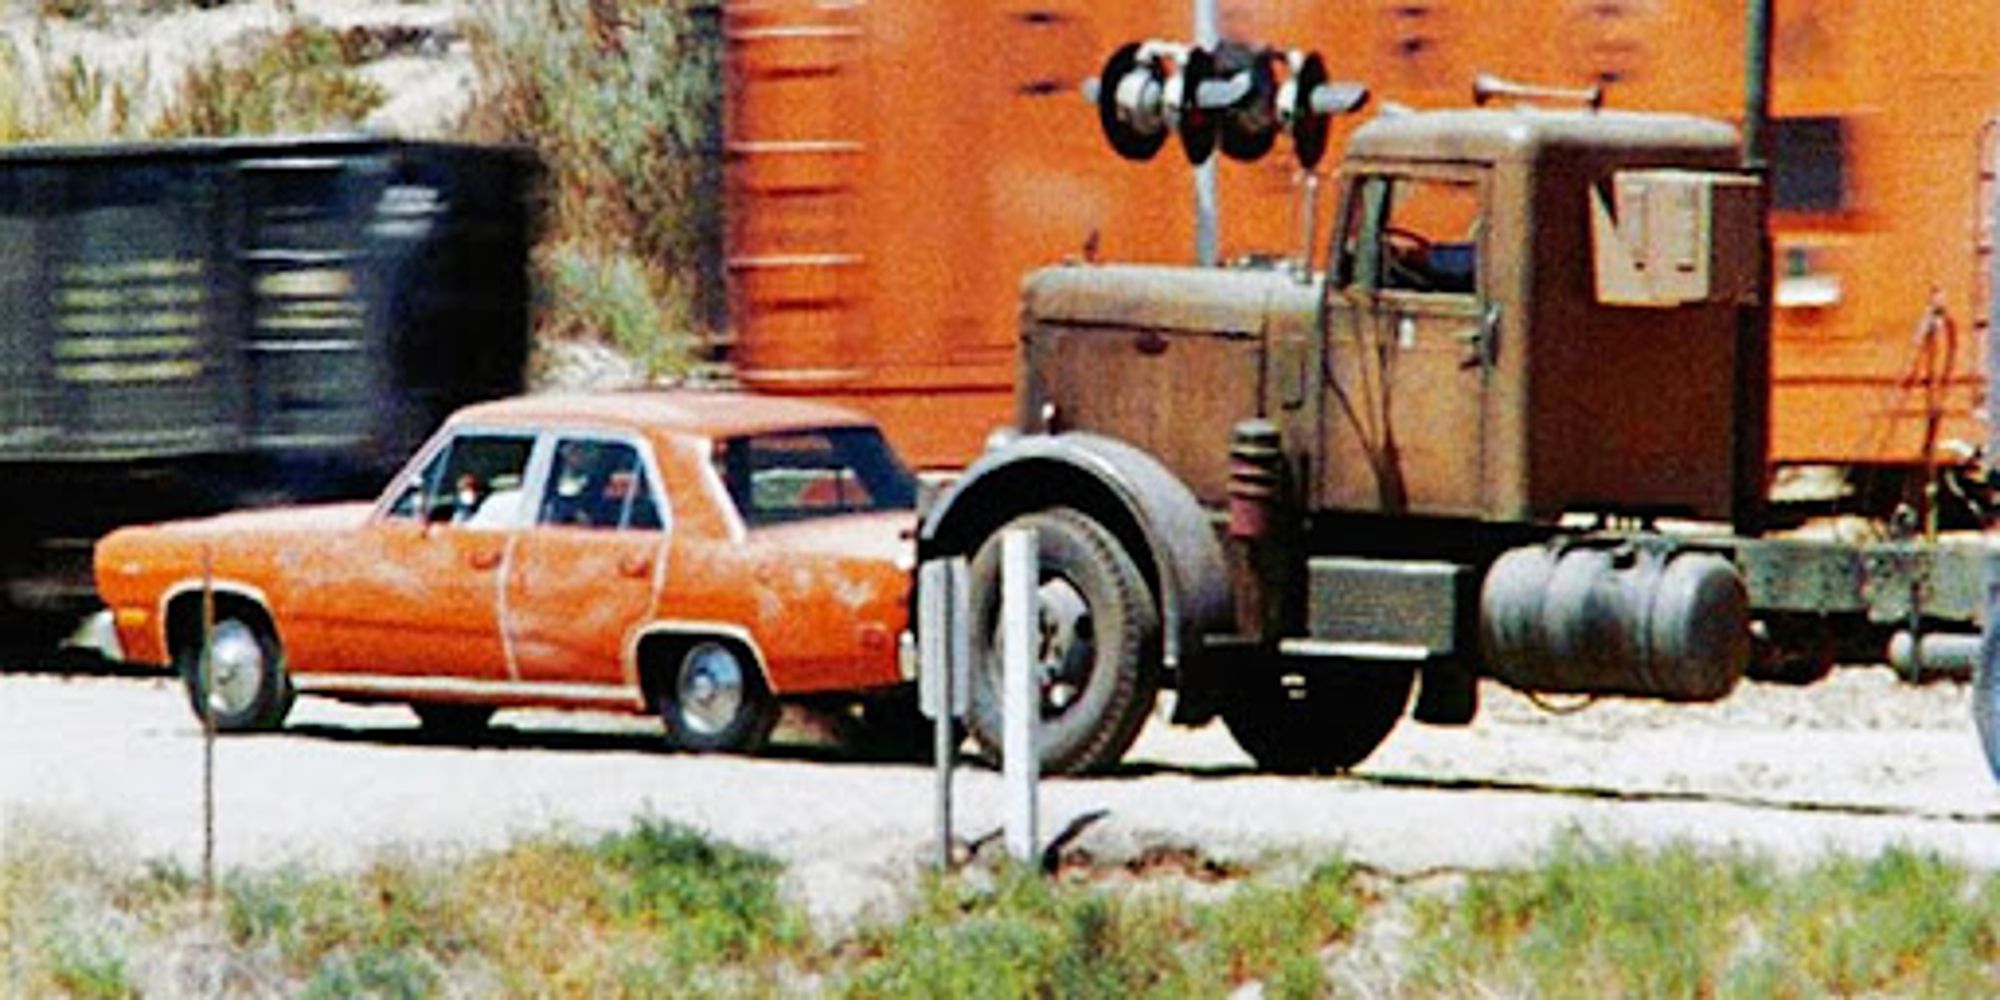 The Plymouth and the Big Rig are stopped at the tracks in Duel